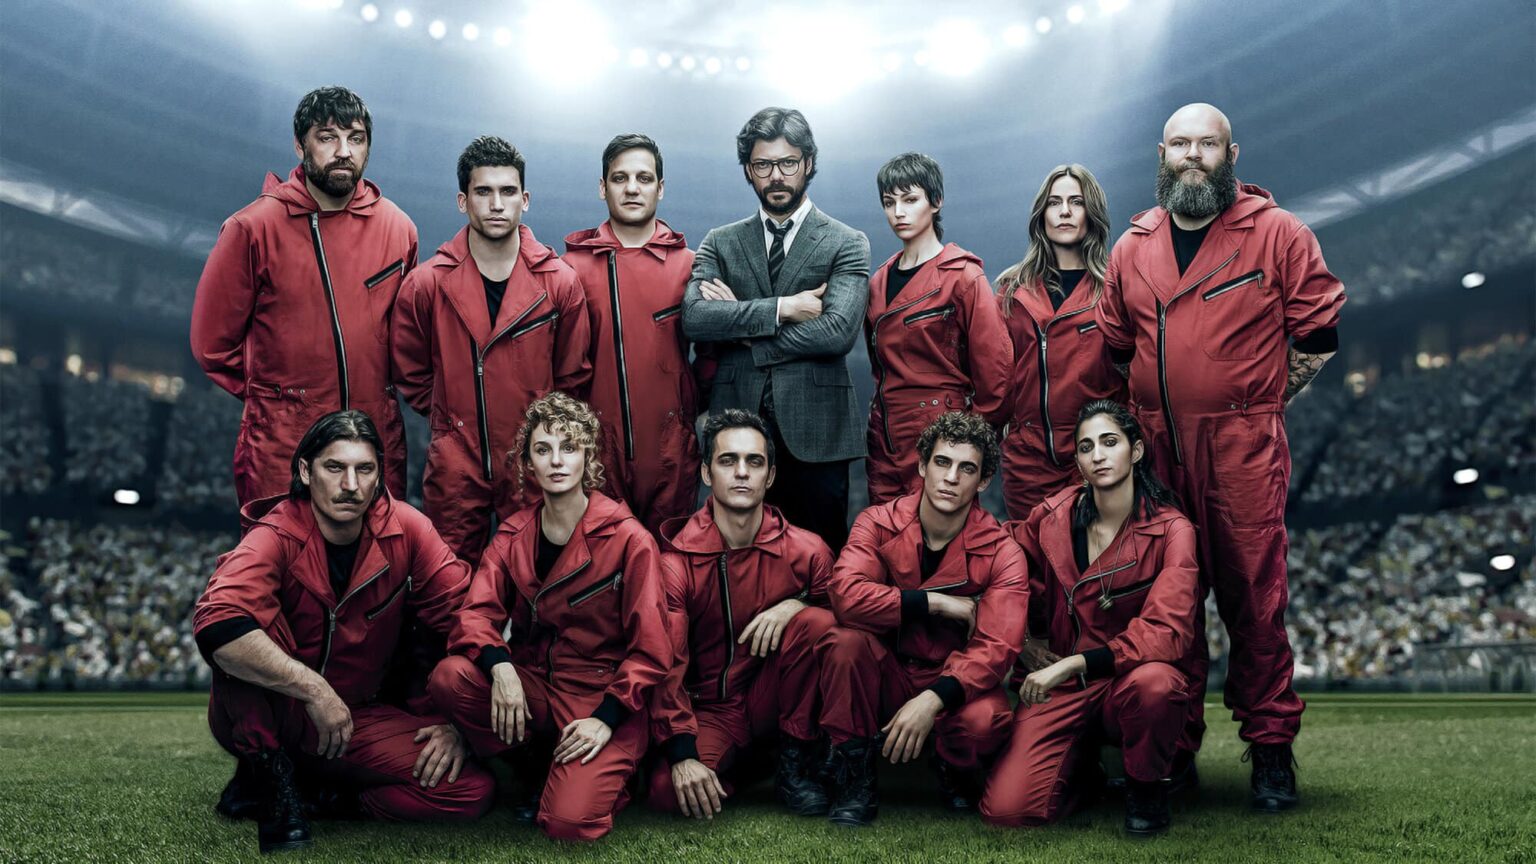 When will beloved 'Money Heist' return with season 5? Here are all the quotes from the cast and crew about the upcoming season.